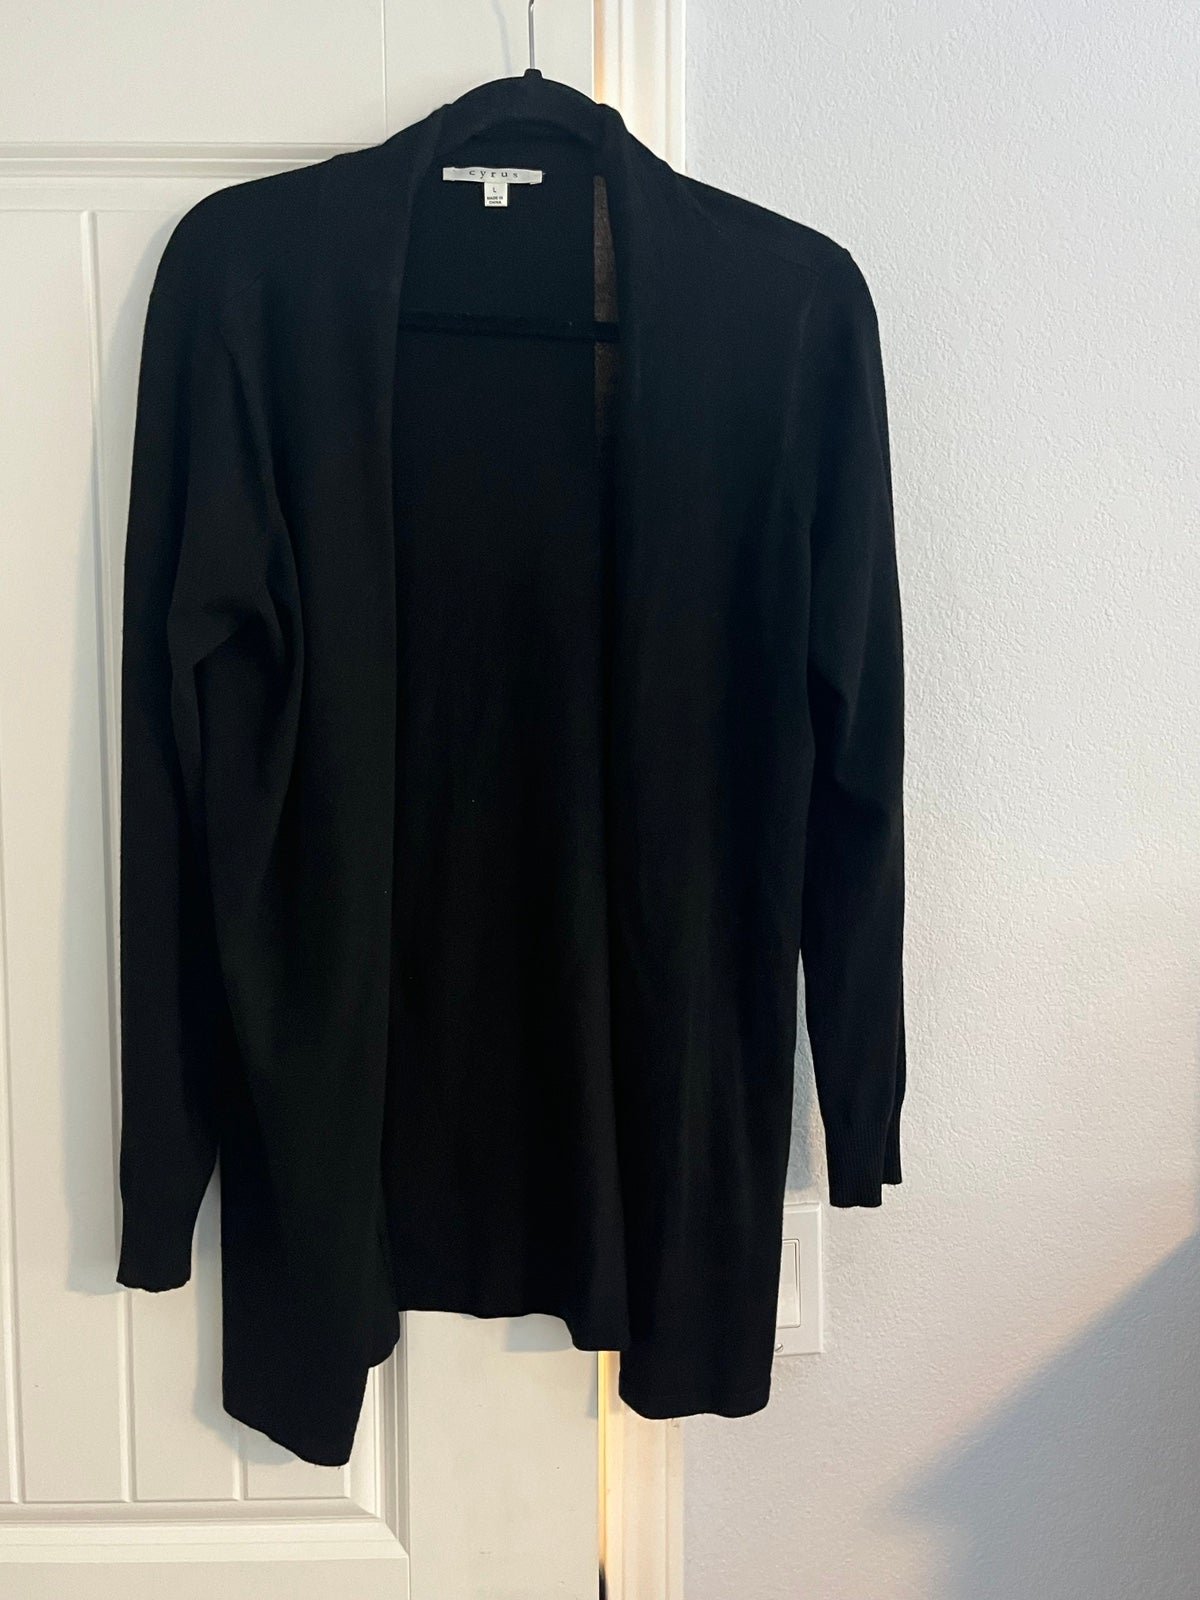 Popular Black cardigan sweater NI9KmauXY all for you